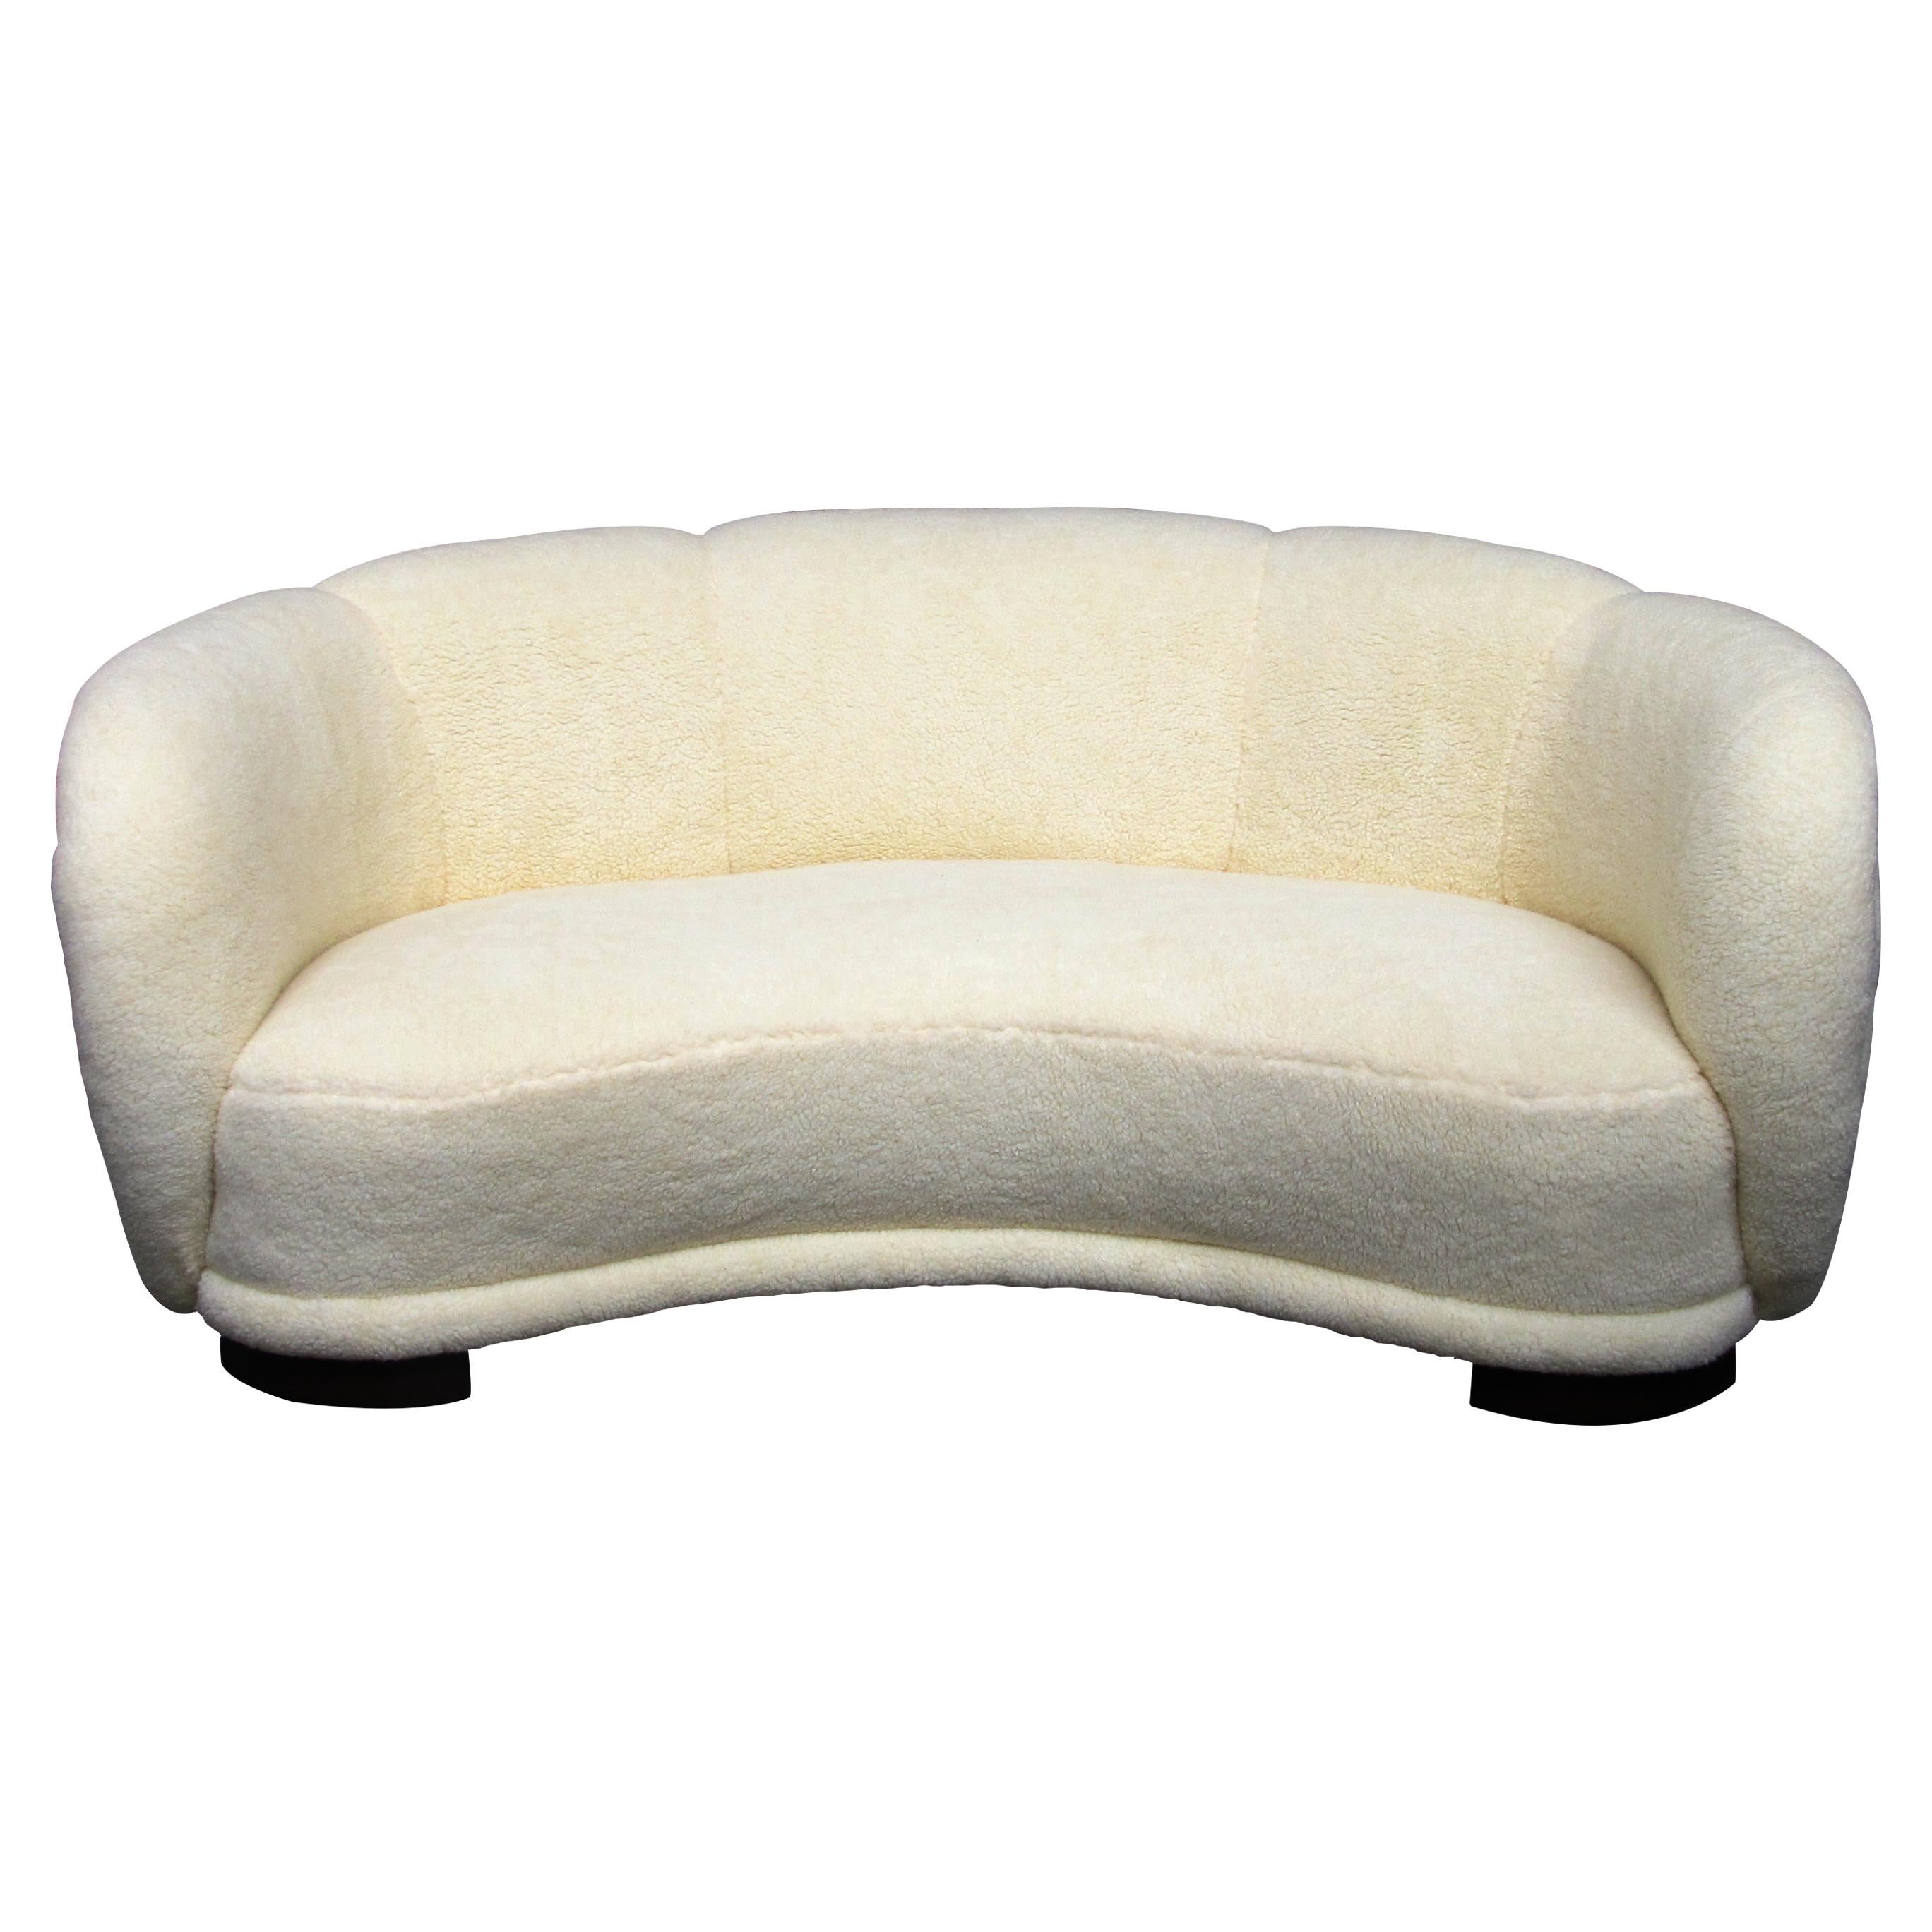 1930s Danish large curved sofa which is typical of the period with elegant and generous curves. The legs follow the shape of the sofa to achieve a continuous curved line. The sofa is very pleasing to the eye and looks stunning from every angle. This